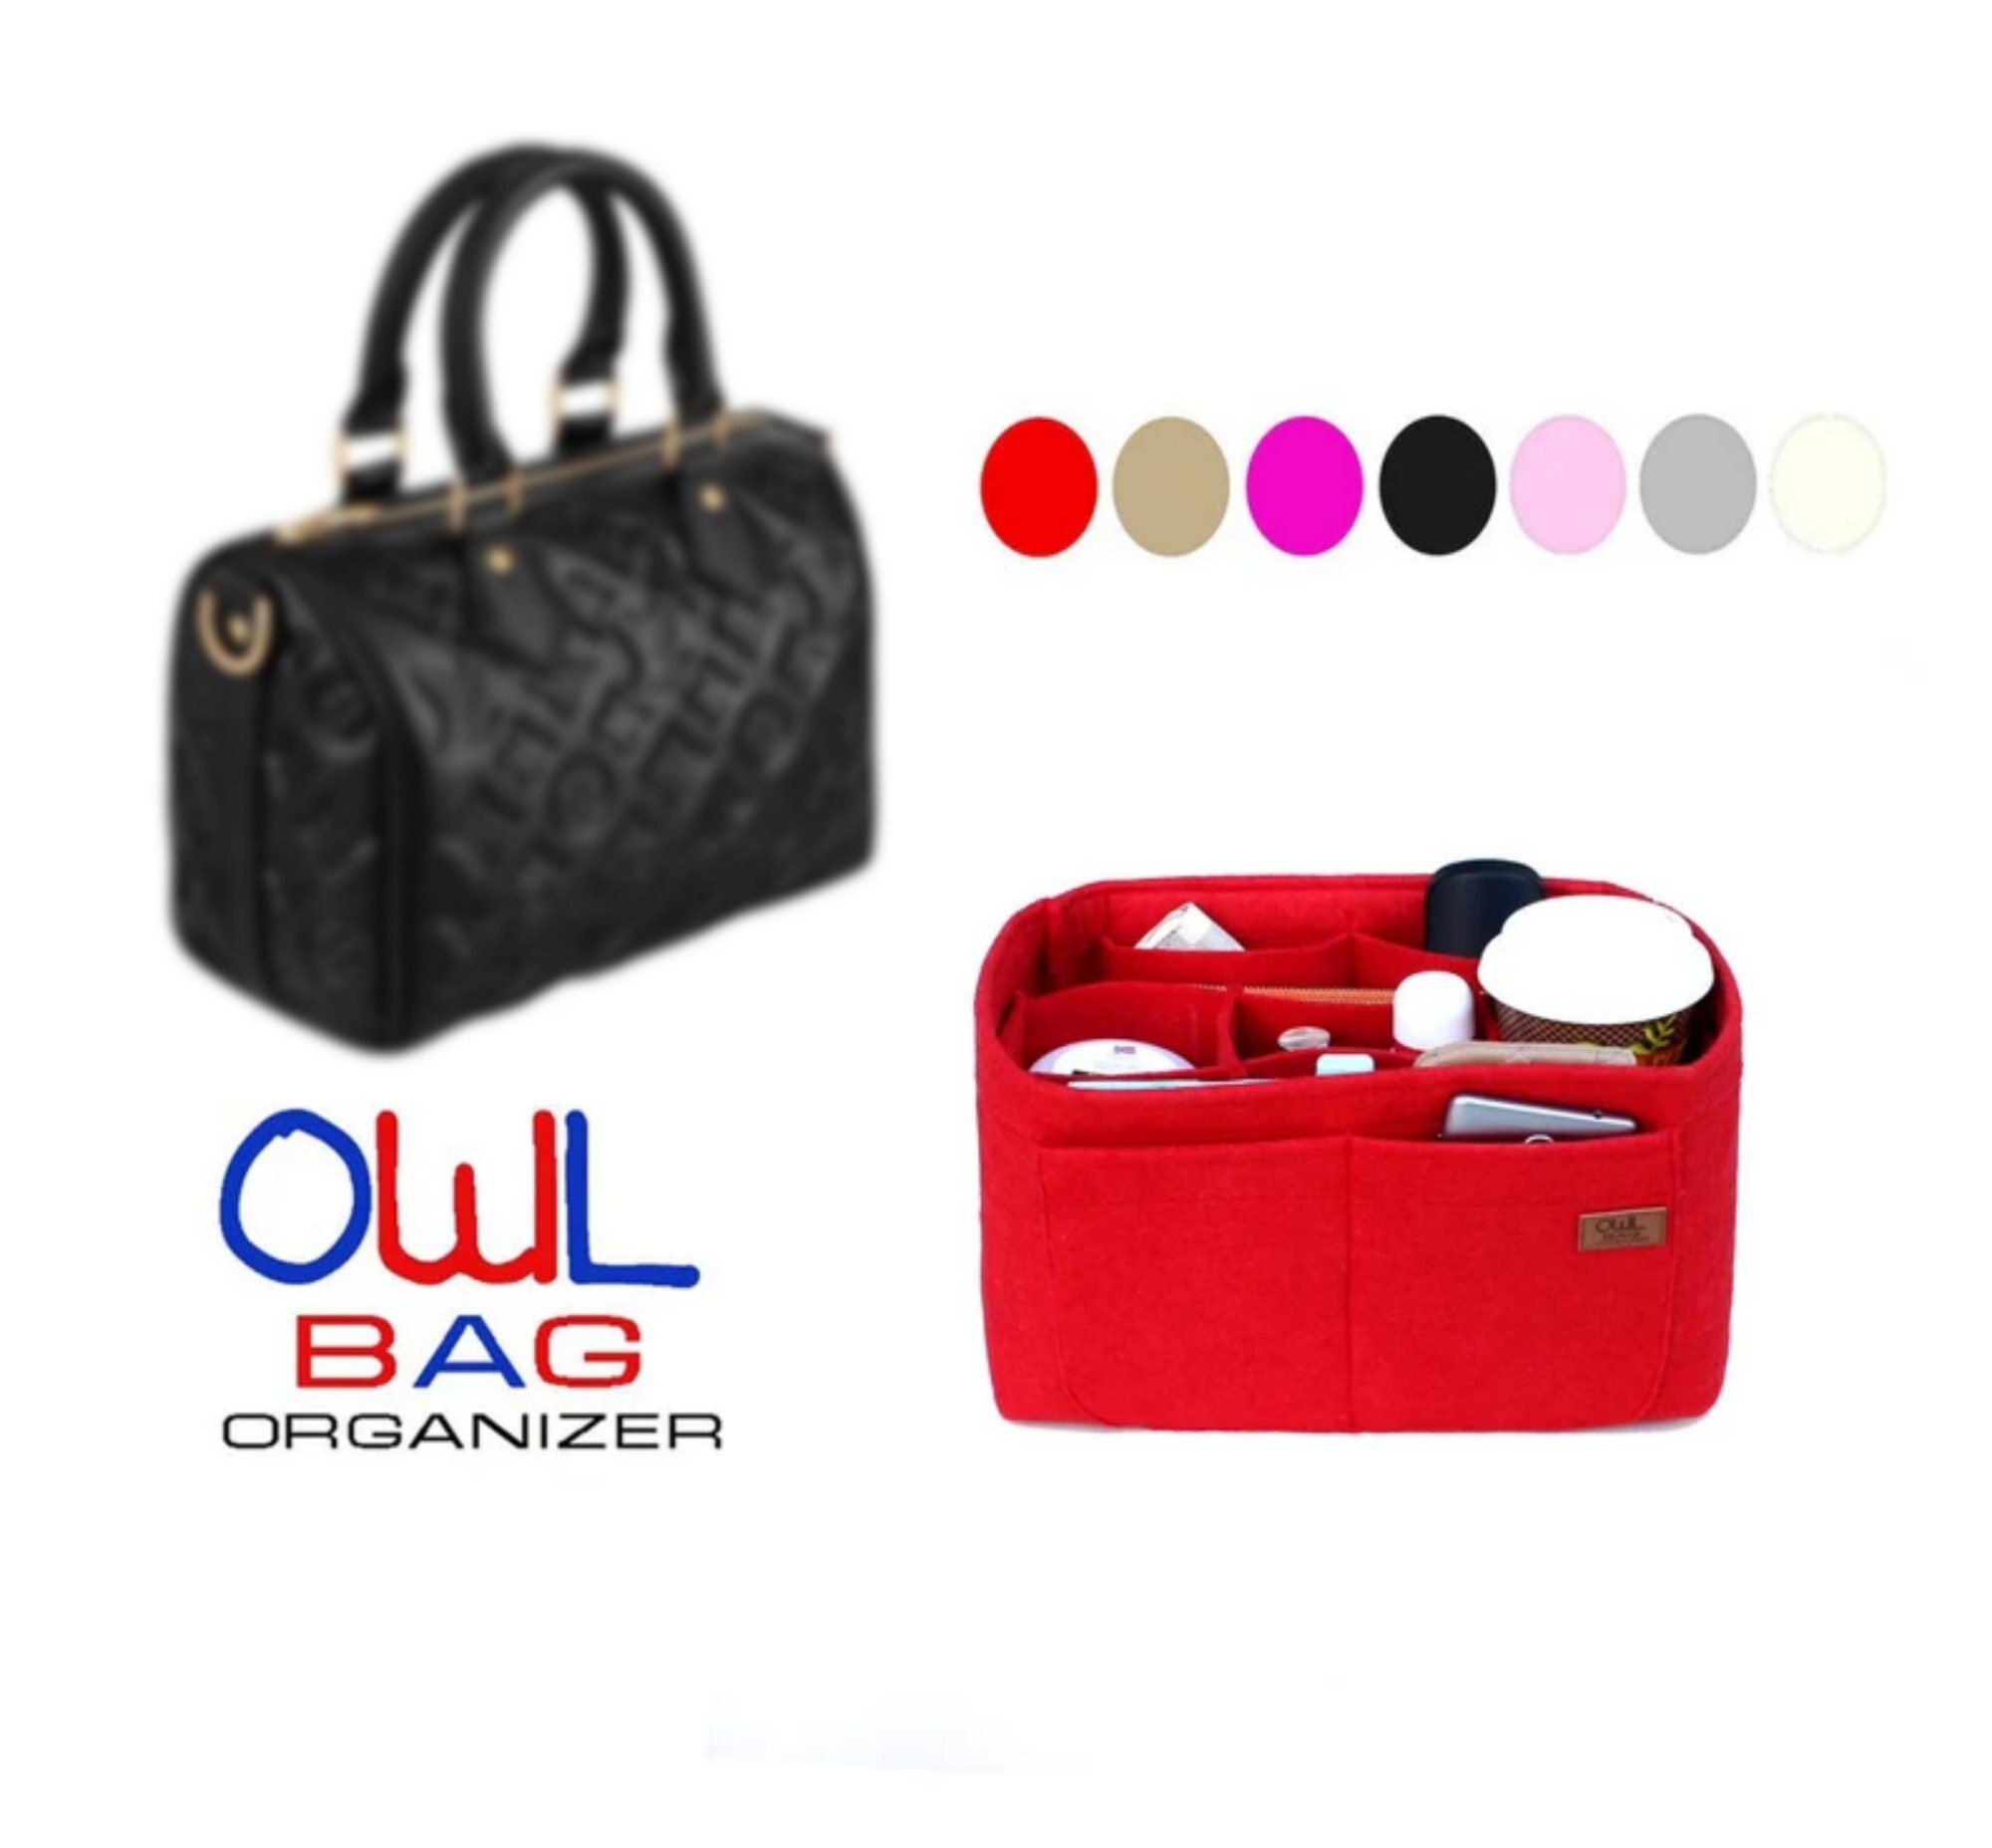  Purse Inserts ​for Lv Speedy 30 Organizer Insert , for monogram  bag, HandBag protective insert ​Tote Bag and hand bag protector, organizer  insert 1083red-L : Clothing, Shoes & Jewelry